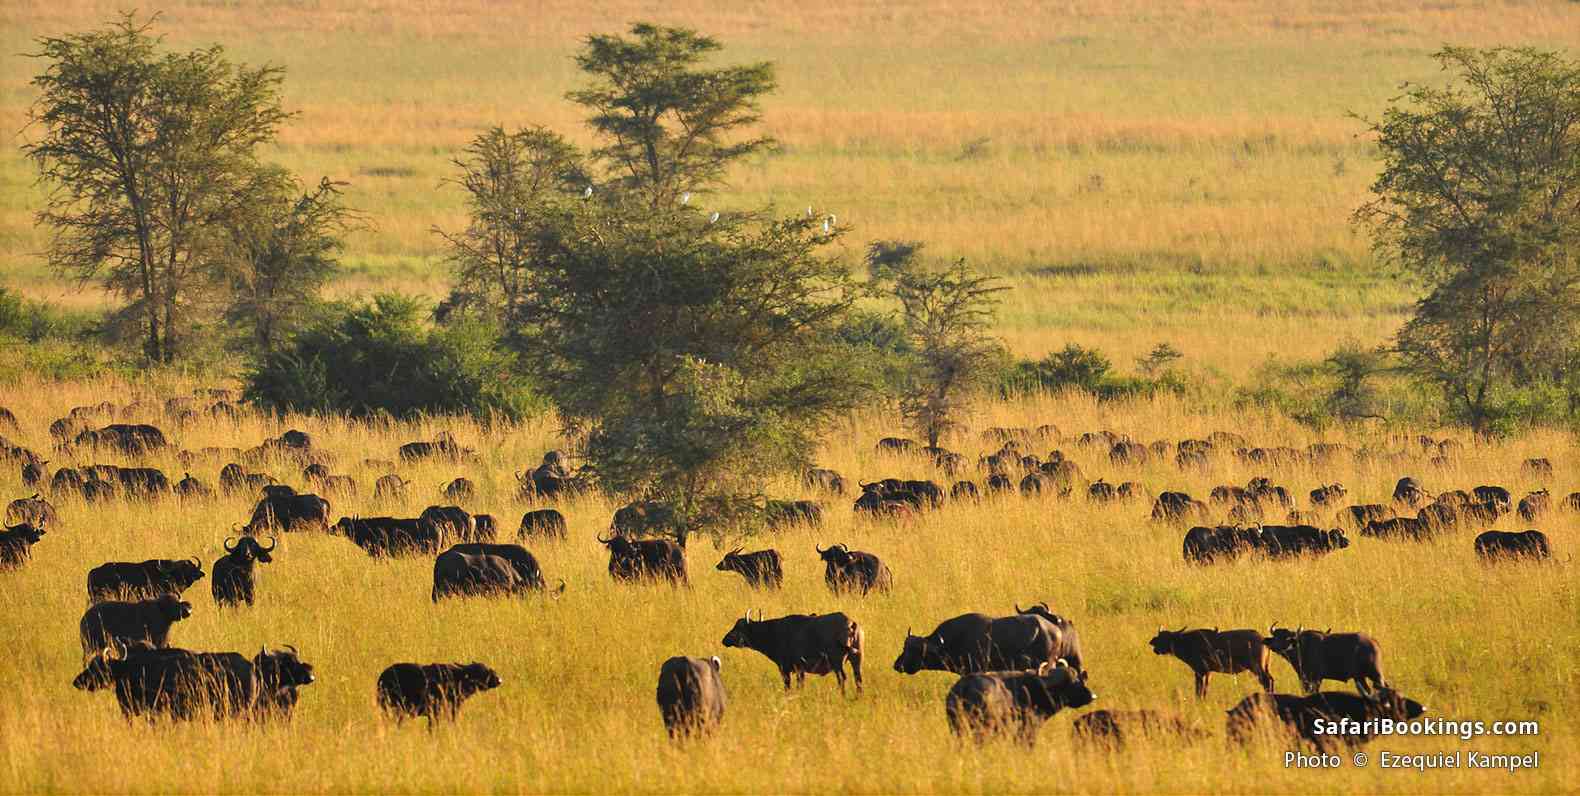 Herd of buffalo in Kidepo Valley National Park